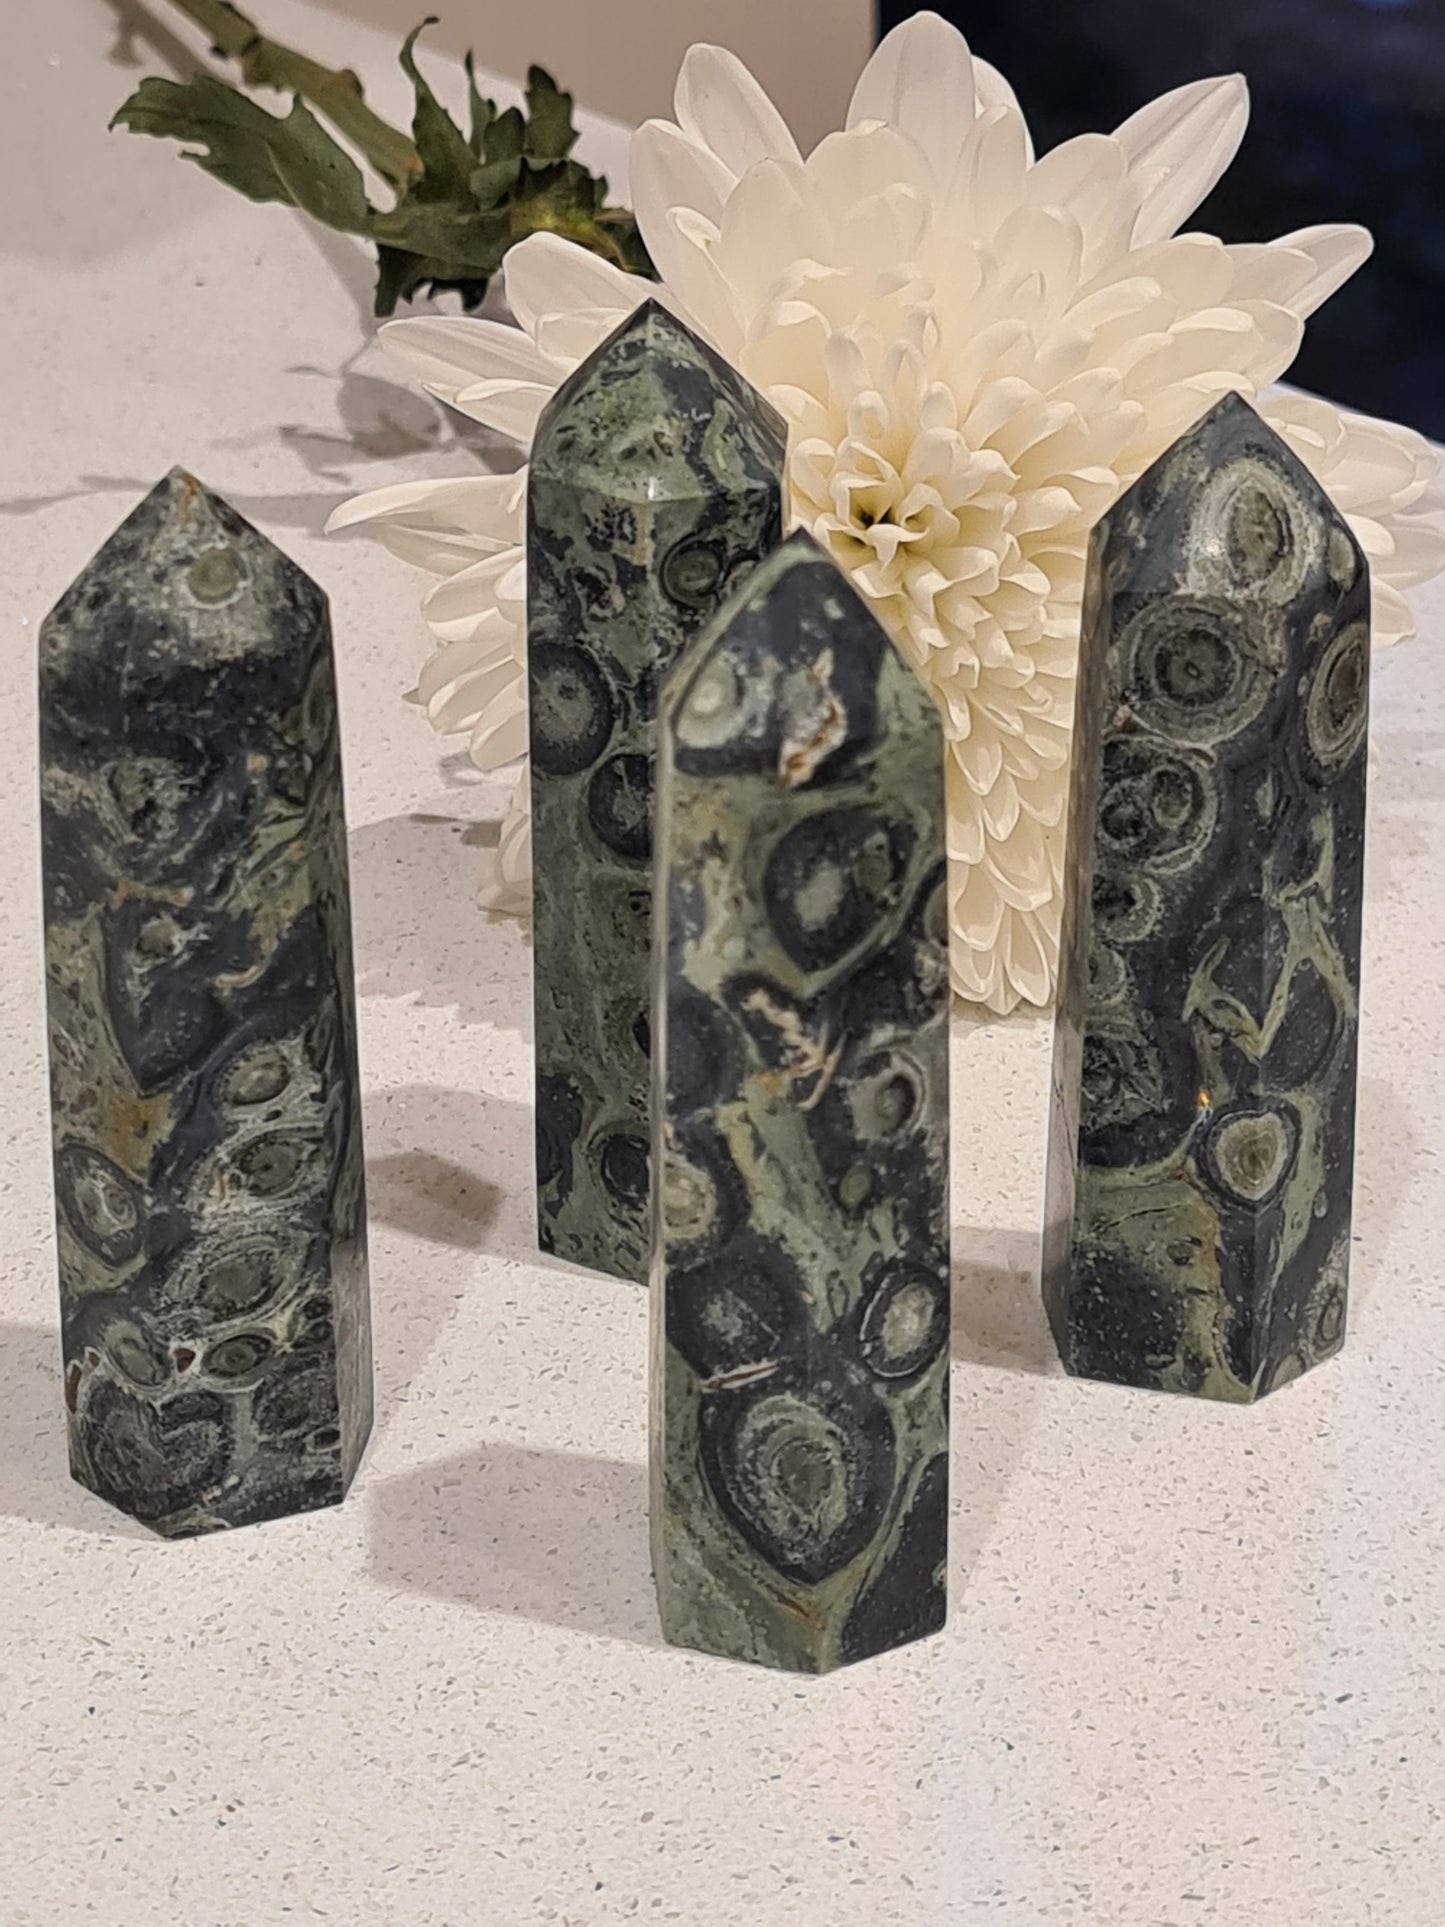 A collection of green, black and grey swirl Kambaba Jasper Towers, with a white Chrysanthenum flower in the background